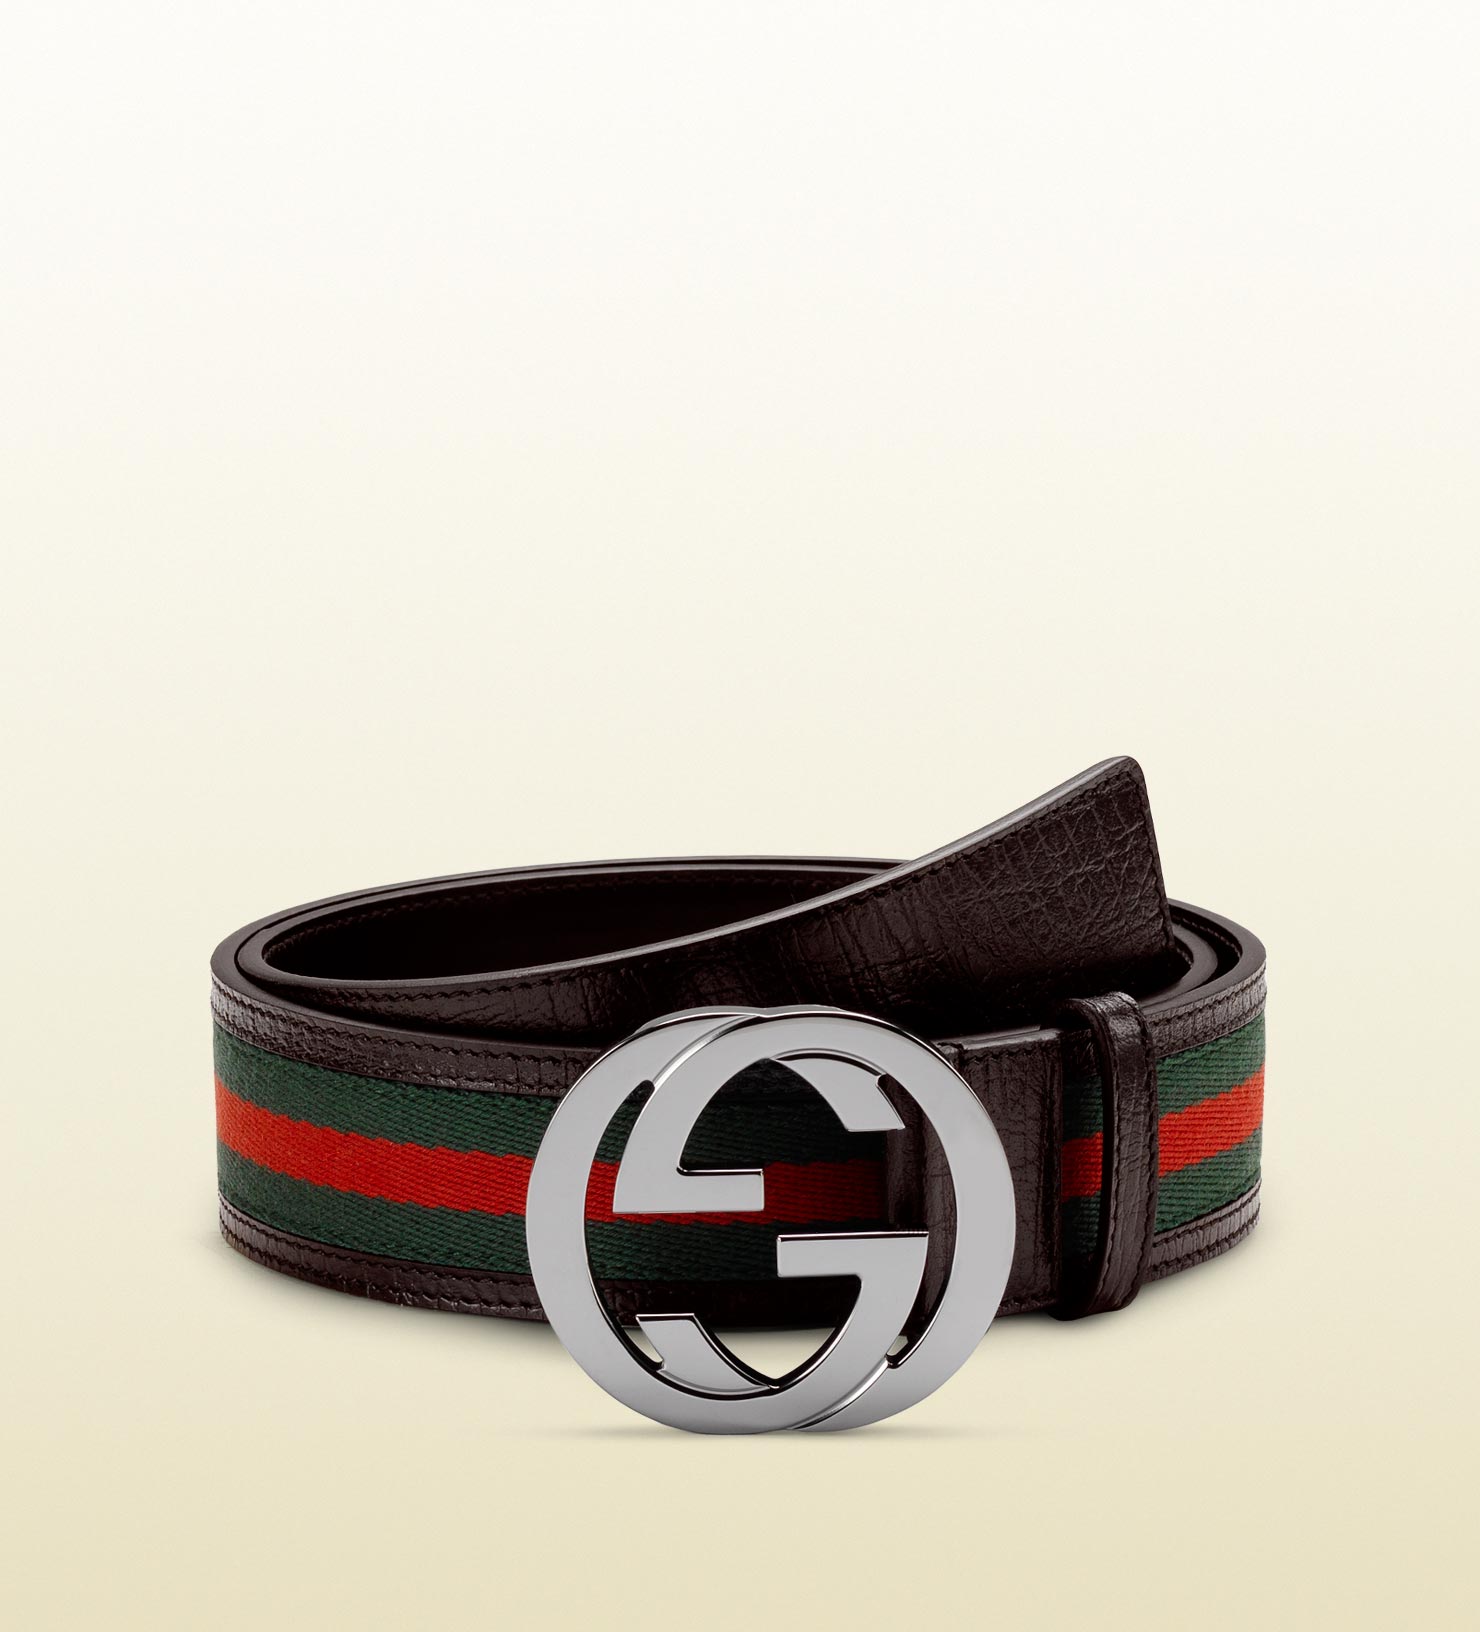 Gucci Signature Web Belt With Interlocking G Buckle in Green for Men - Lyst